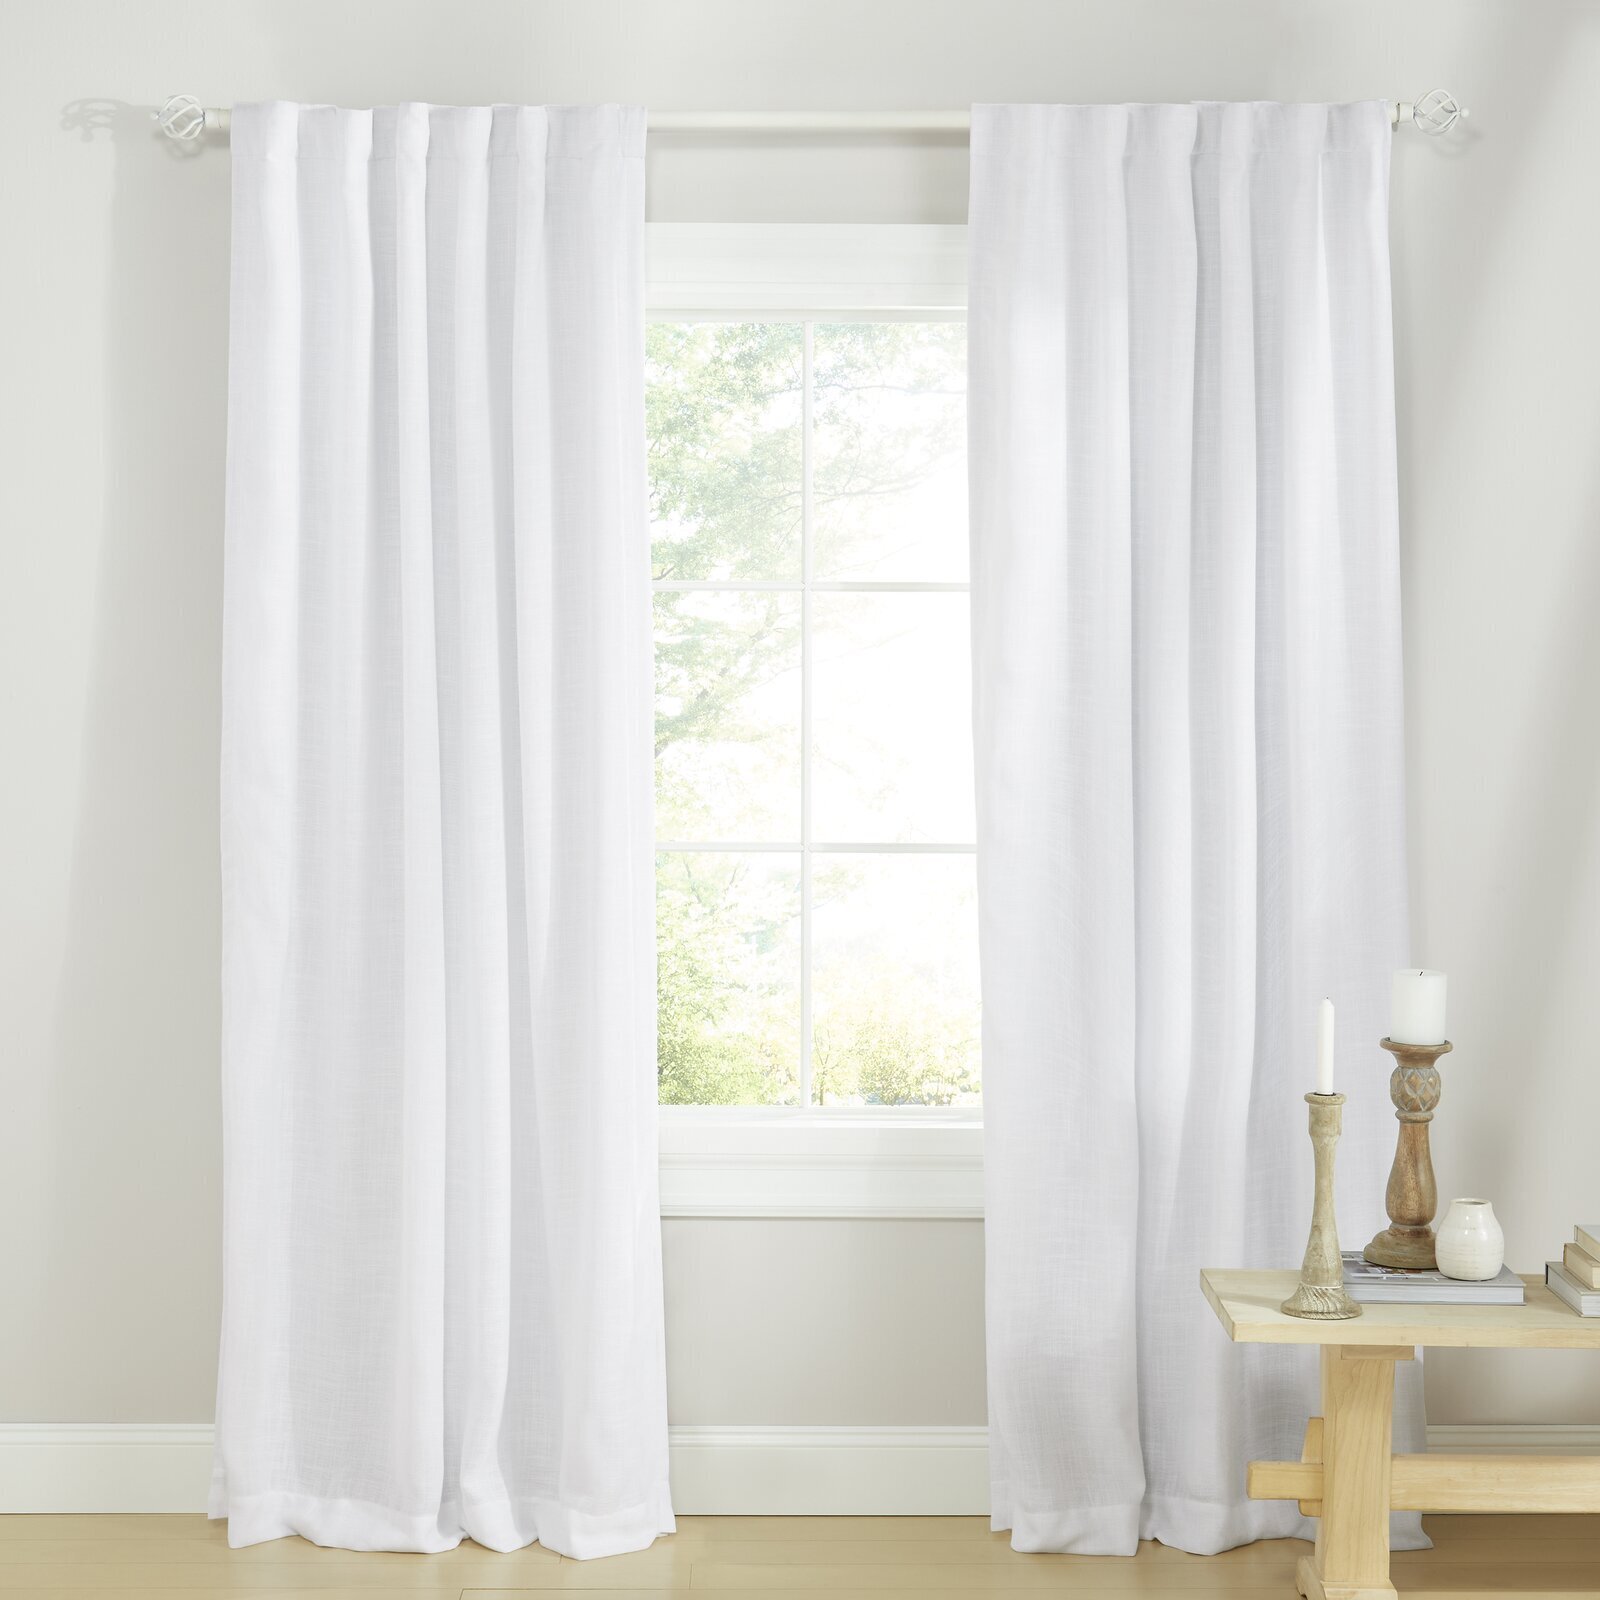 Monochrome French linen curtains